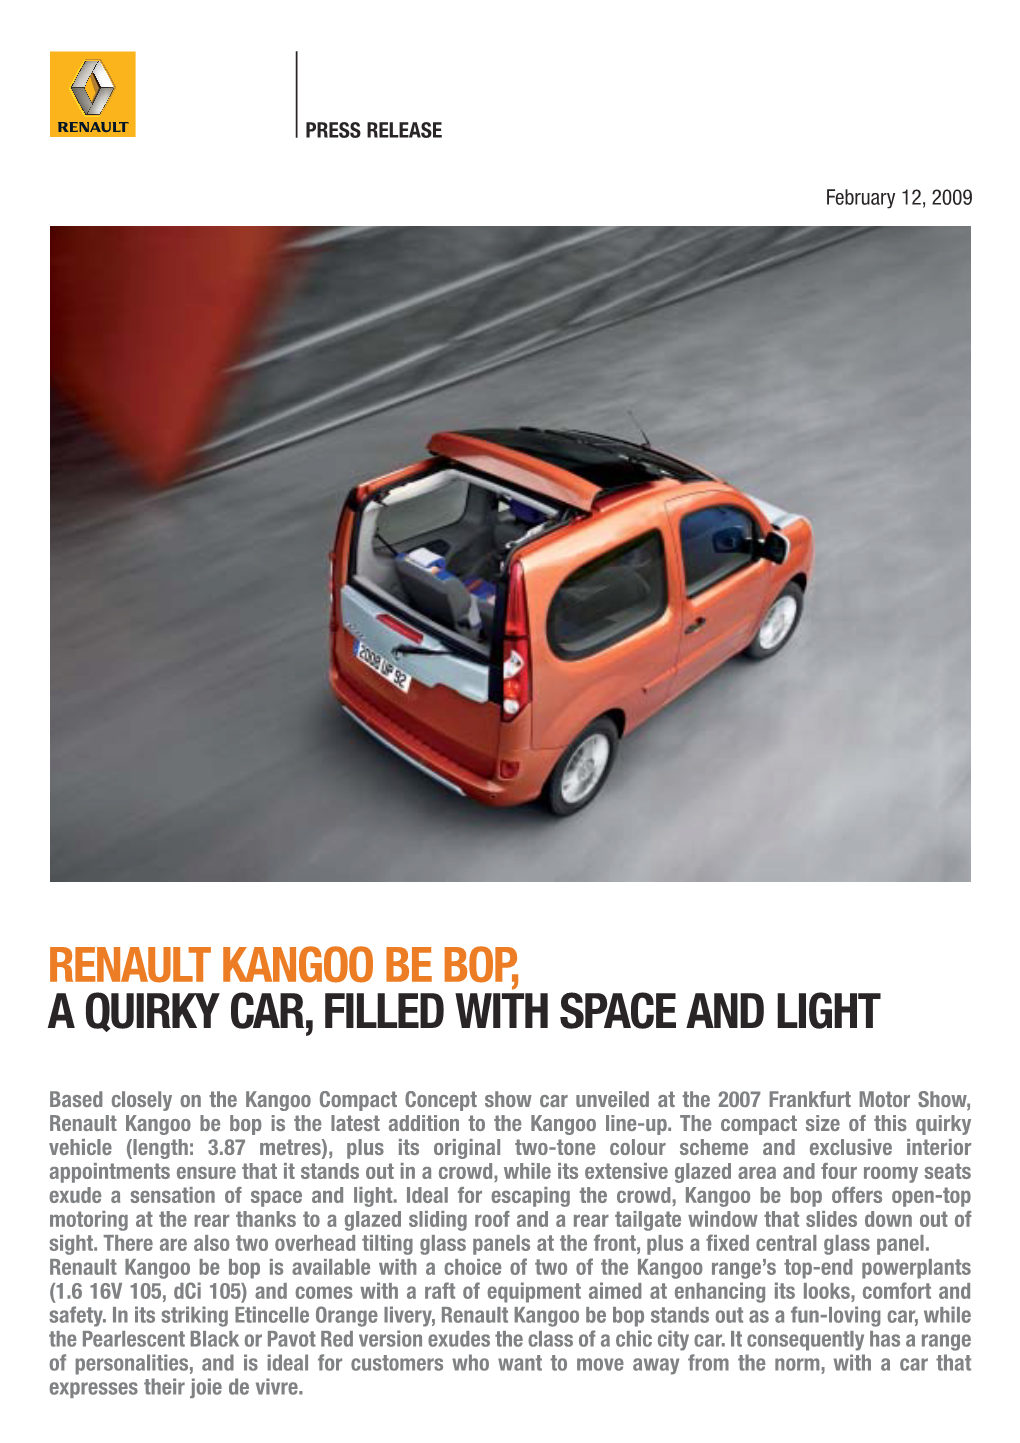 Renault Kangoo Be Bop, a Quirky Car, Filled with Space and Light